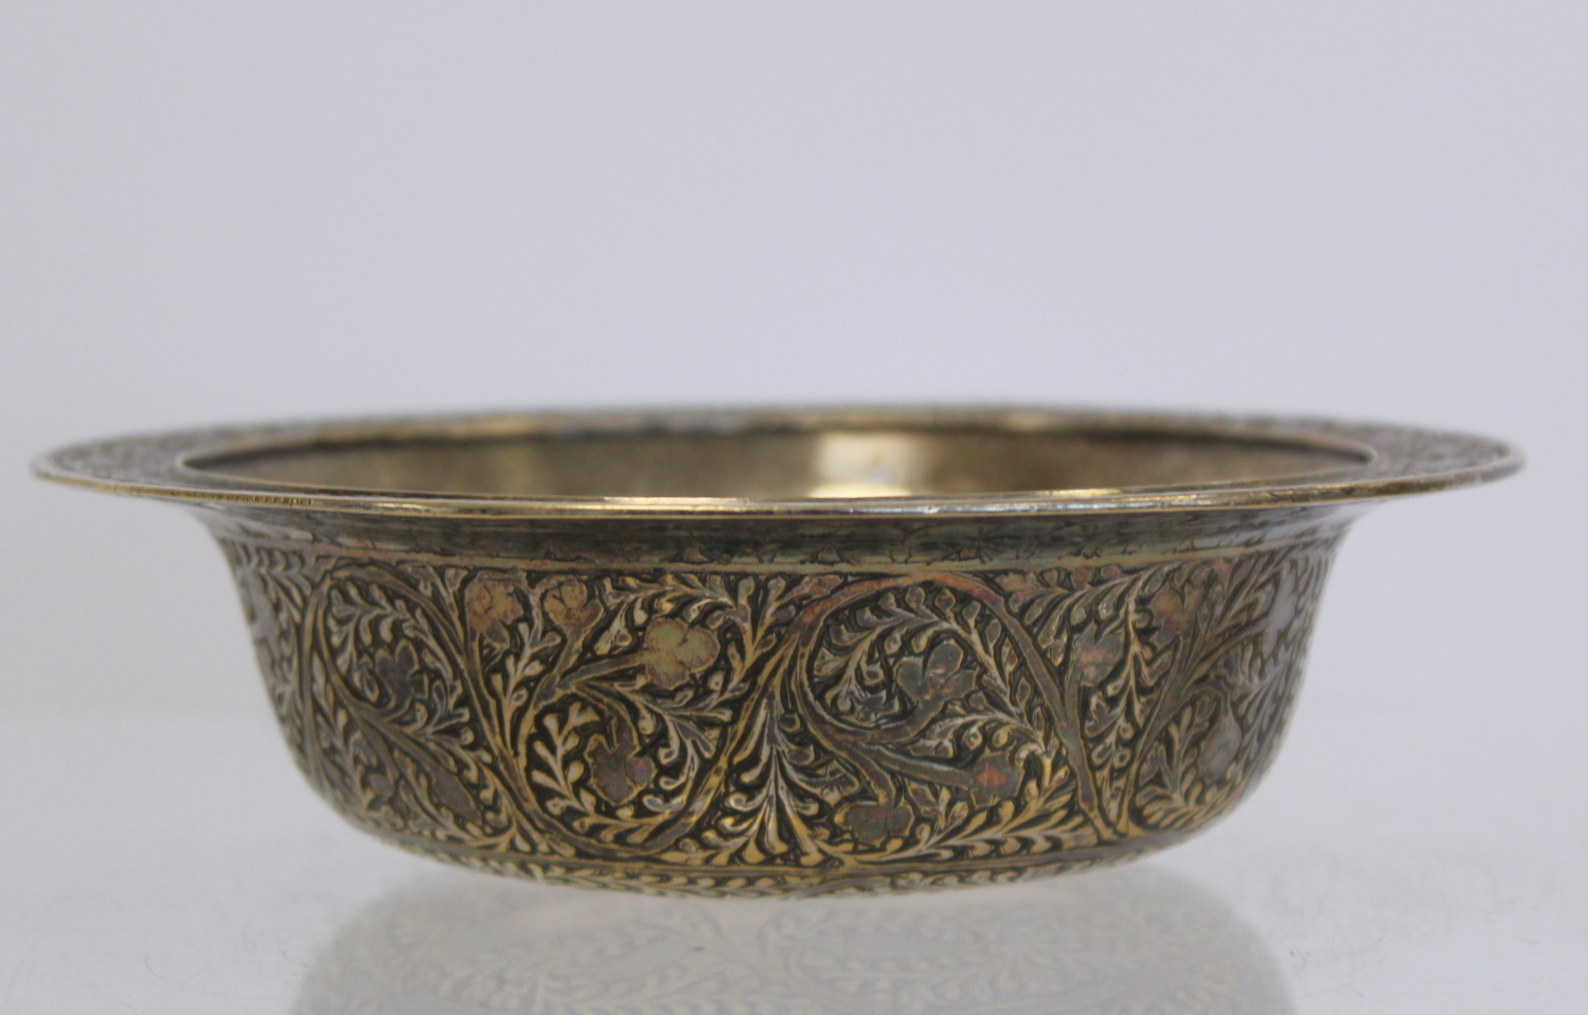 Oriental silvered circular brass bowl with engraved floral and foliate decoration, 16cm diam. - Image 3 of 9